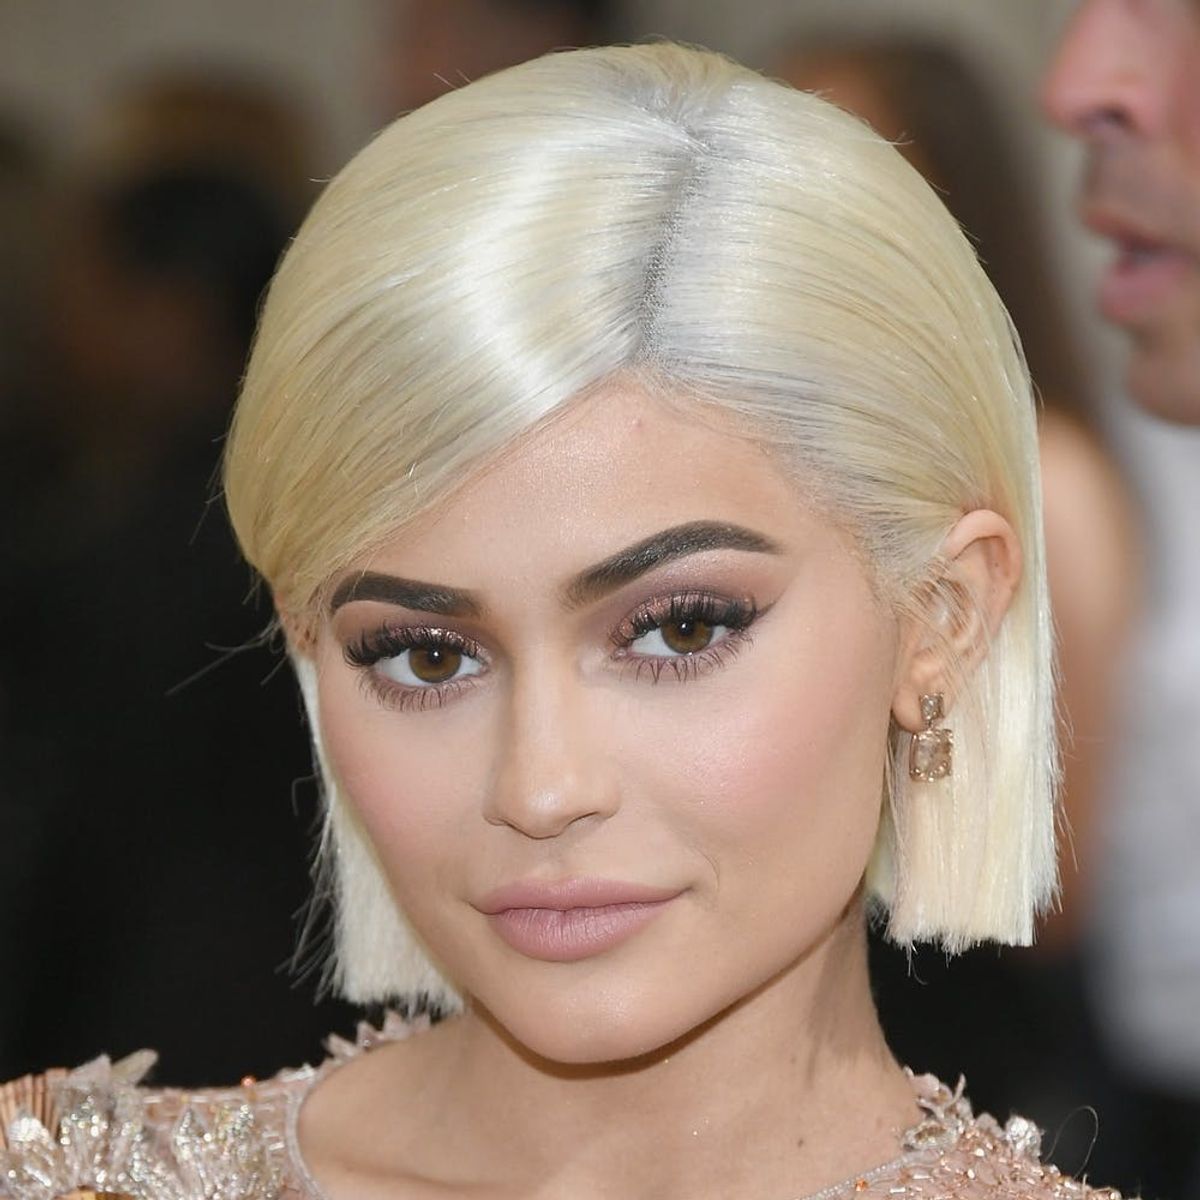 Here’s How Kylie Jenner *Really* Feels About Her Breakup With Tyga